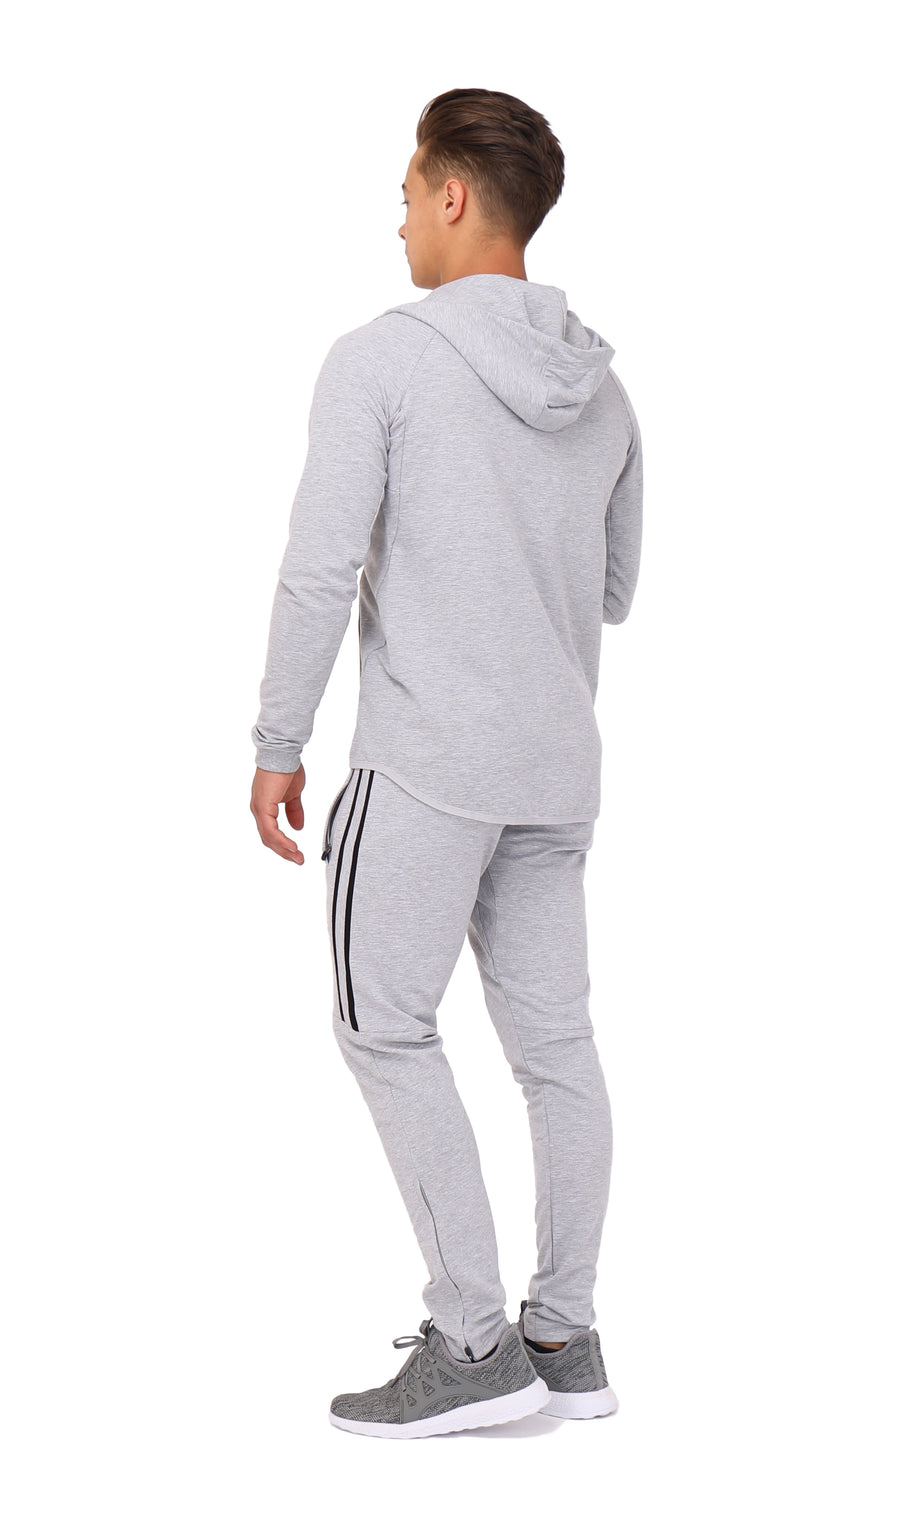 "SCR Sportswear premium joggers in Light Grey Heather, perfect for your active lifestyle and workouts"